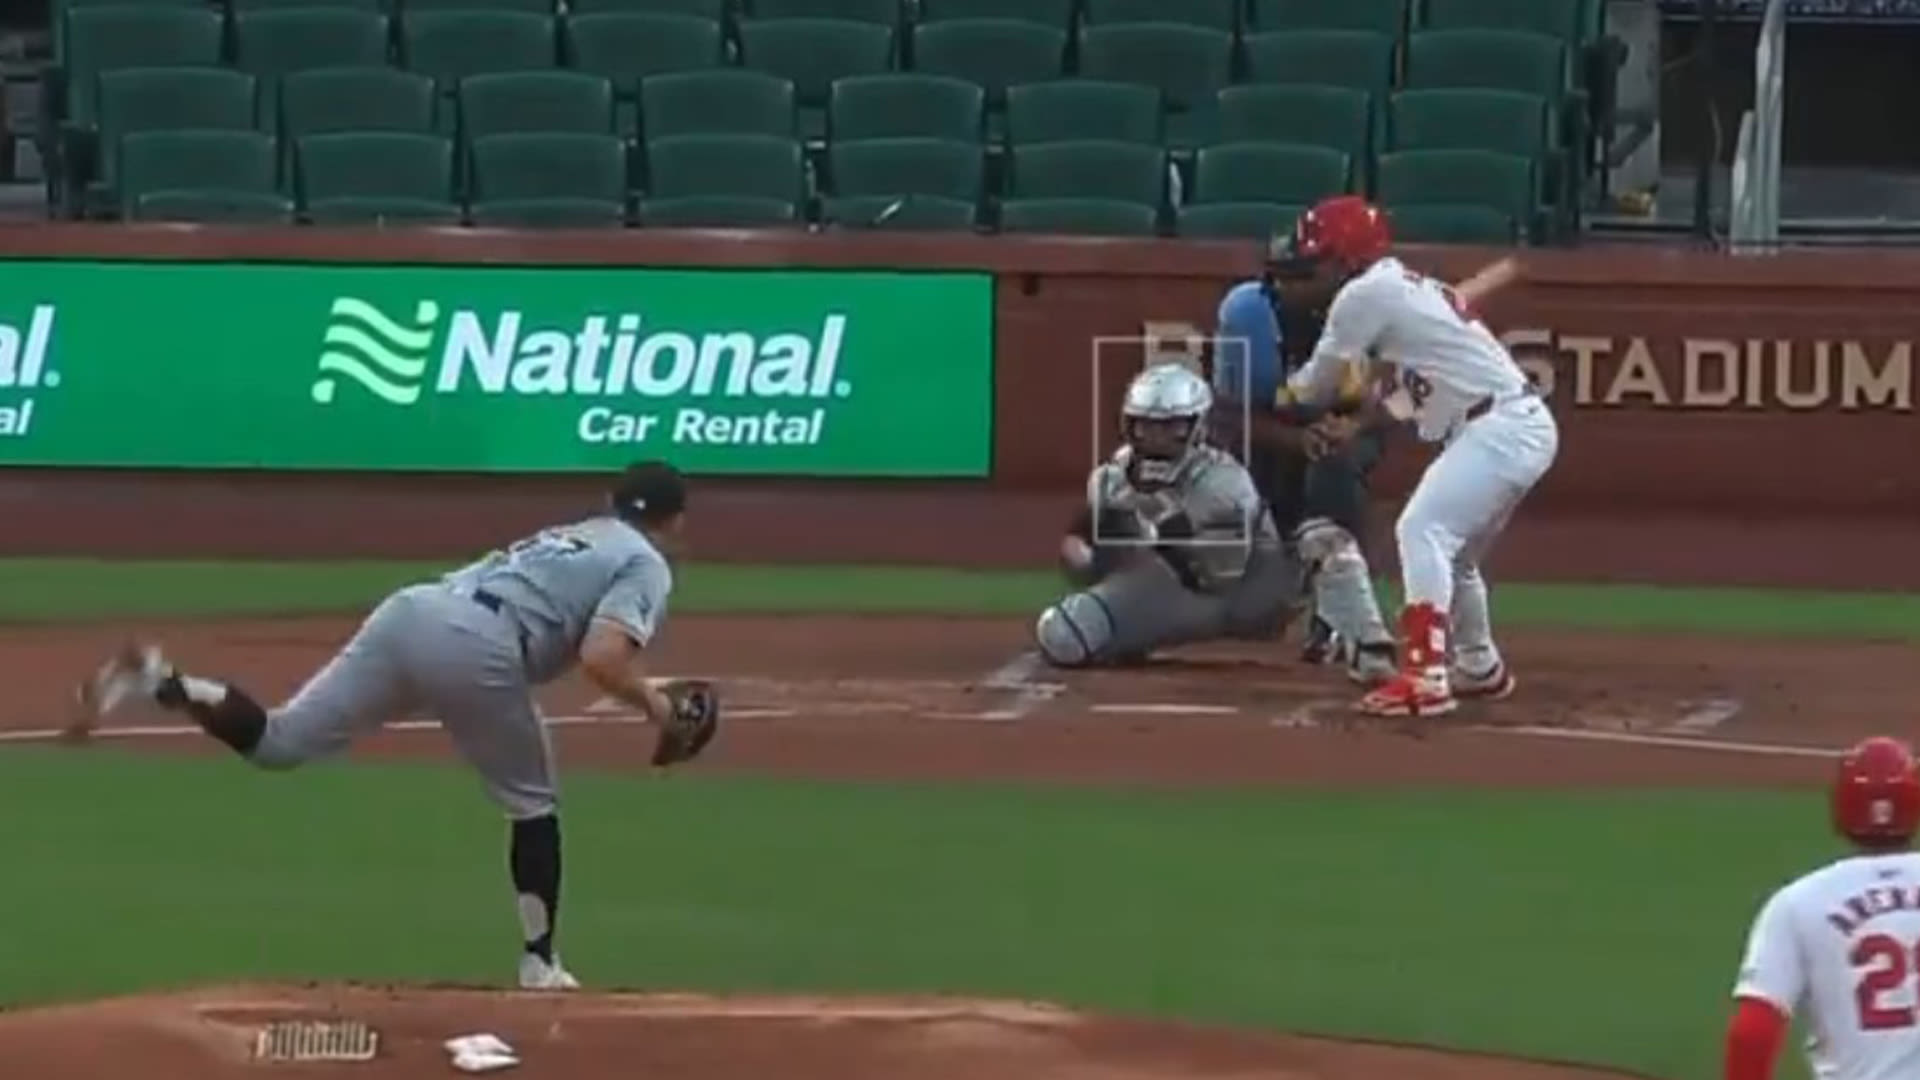 St. Louis Cardinals announcer Chip Caray rips umpire after game-ending strike